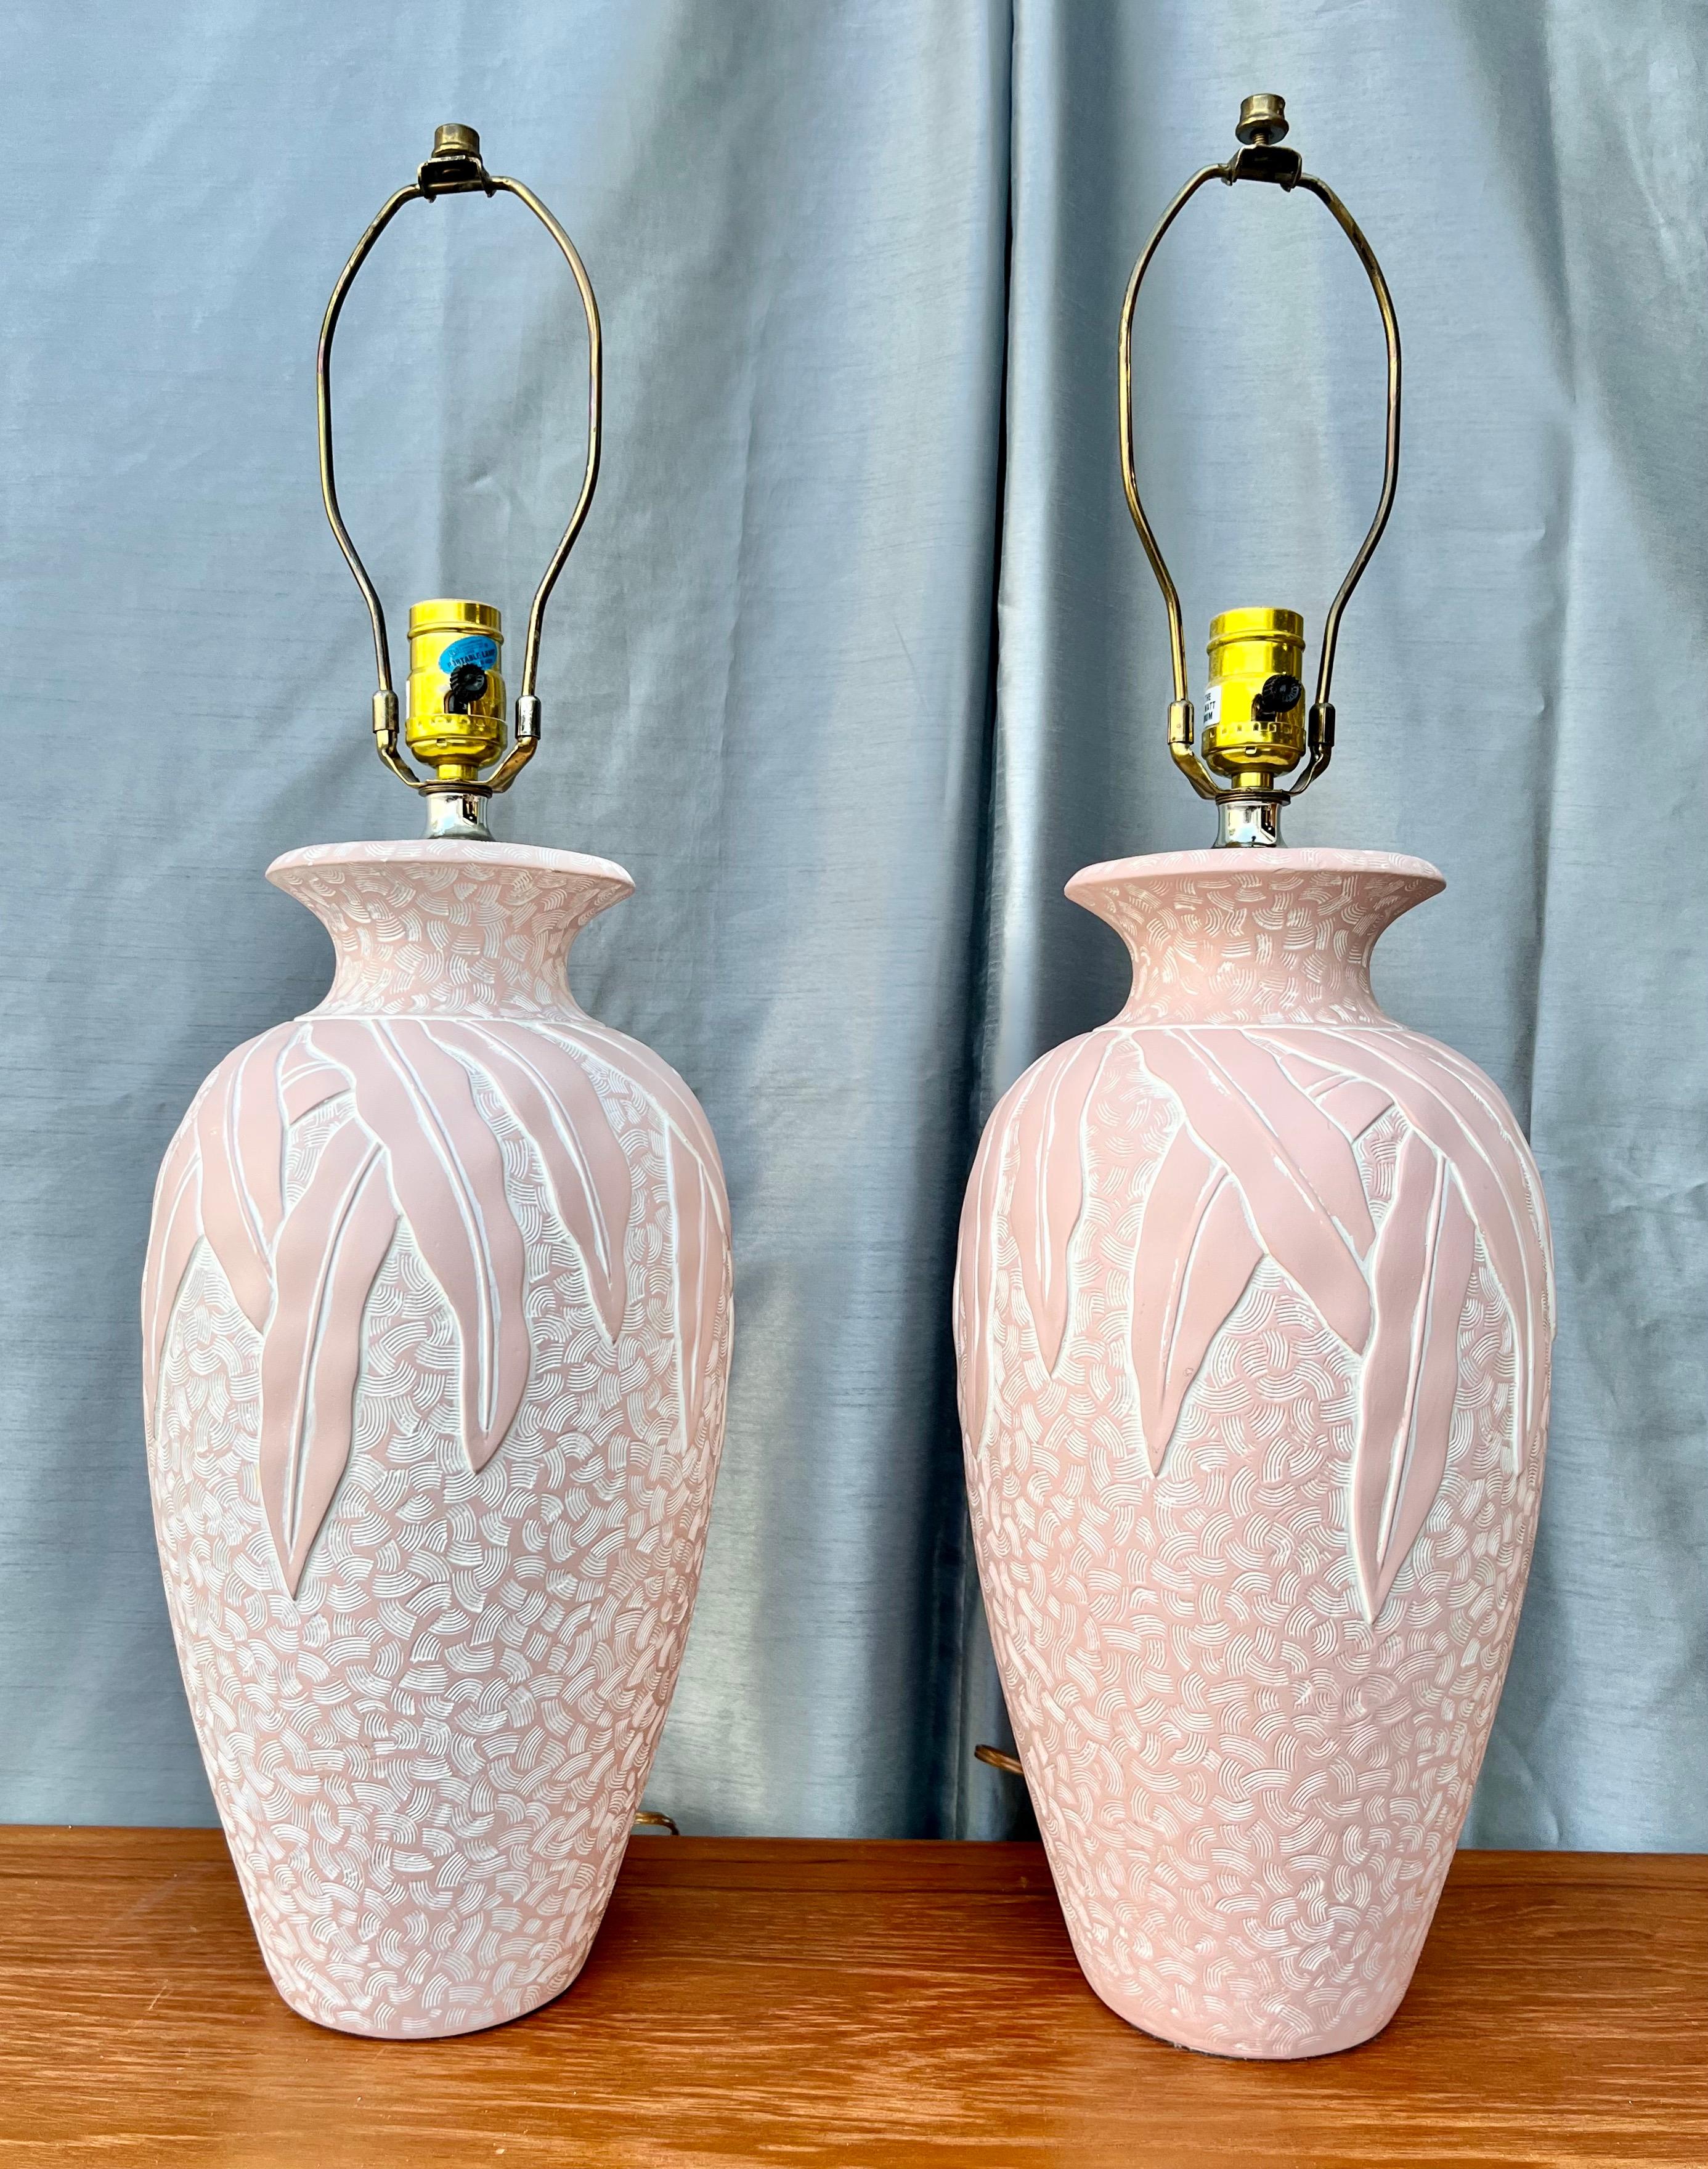 A pair of Vintage Coastal Style Embossed Plaster Table Lamps. Circa 1980s
Feature a sculptural urn-shaped textured plaster body with tropical foliage embossed reliefs
In Excellent Near Mint Original Condition With Very Minor Signs of Wear and